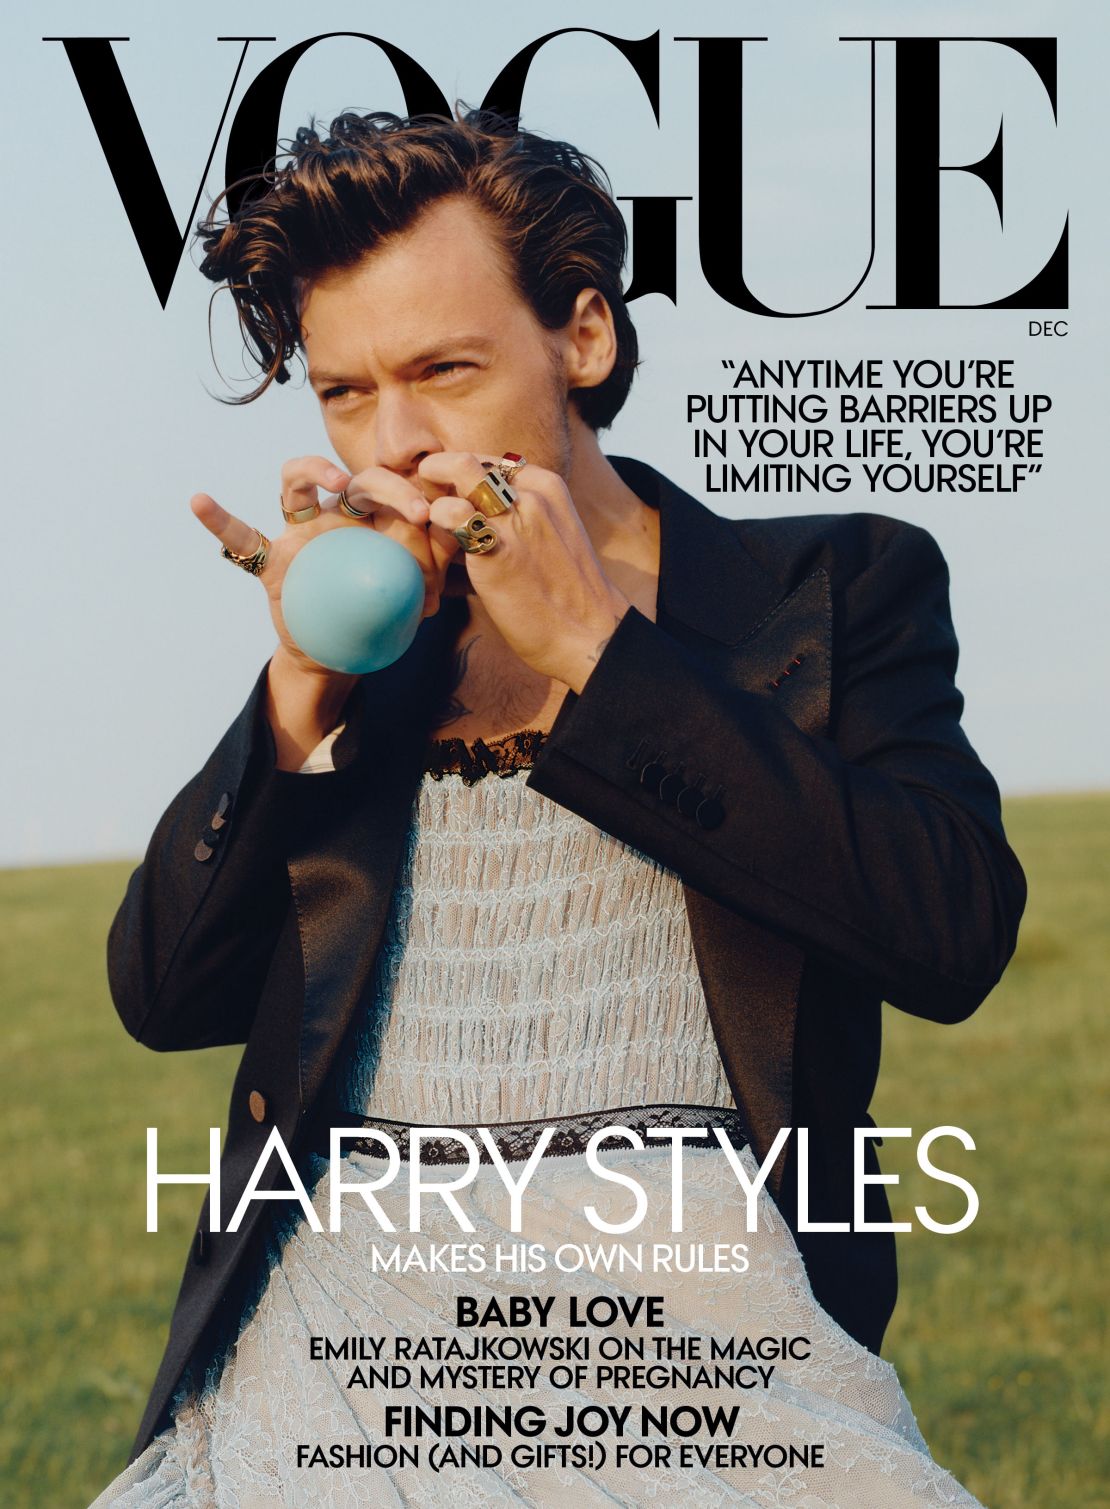 Harry Styles is US Vogue's December cover star.